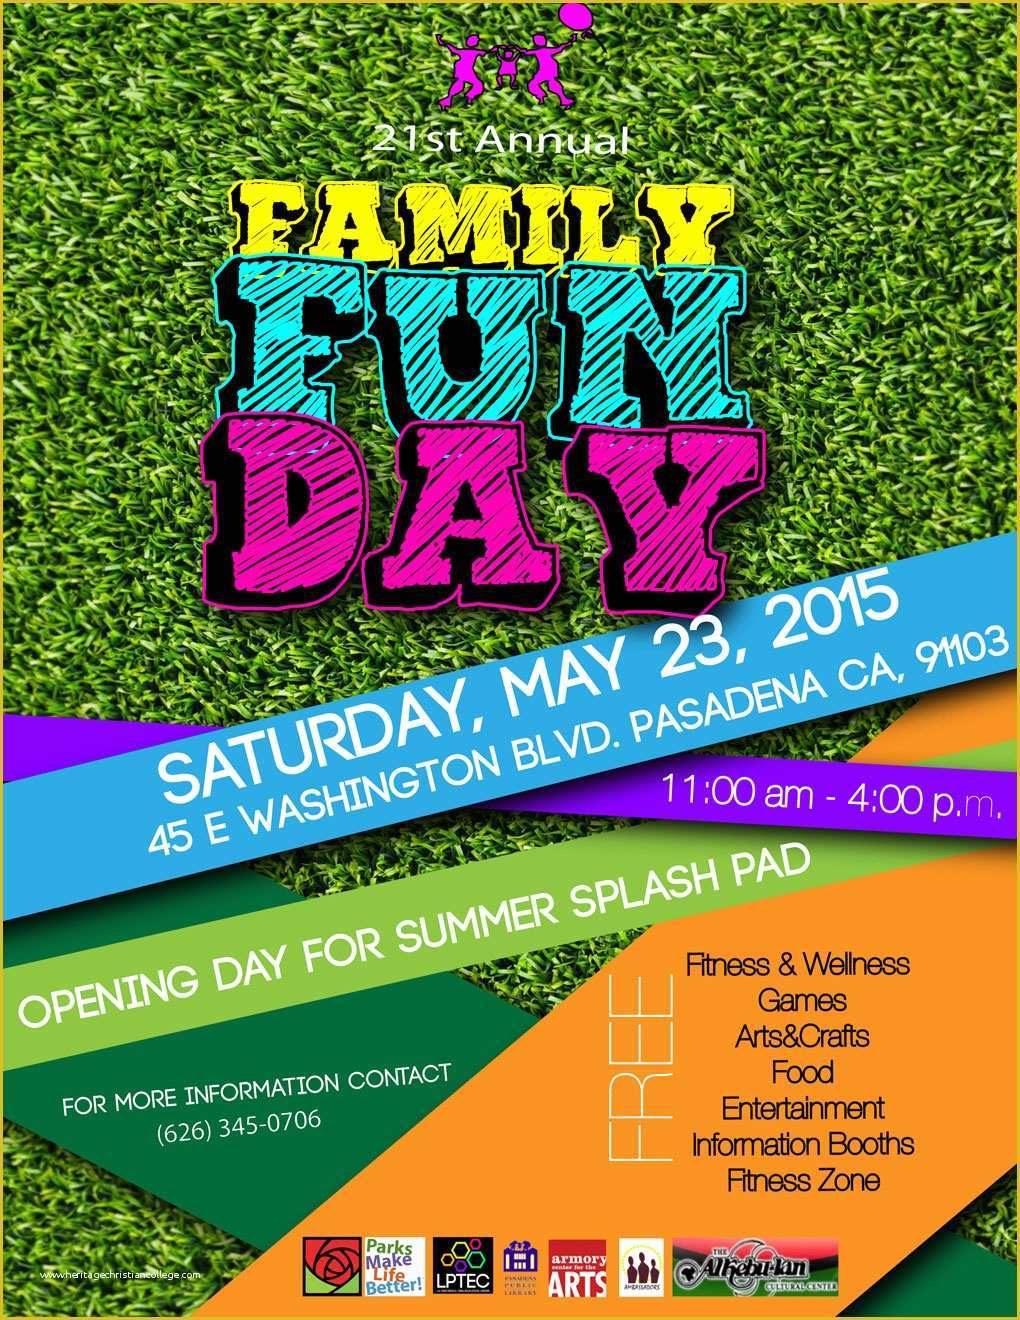 Fun Day Flyer Template Free Of Celebrate Health and Wellness at Free Family Fun Day May